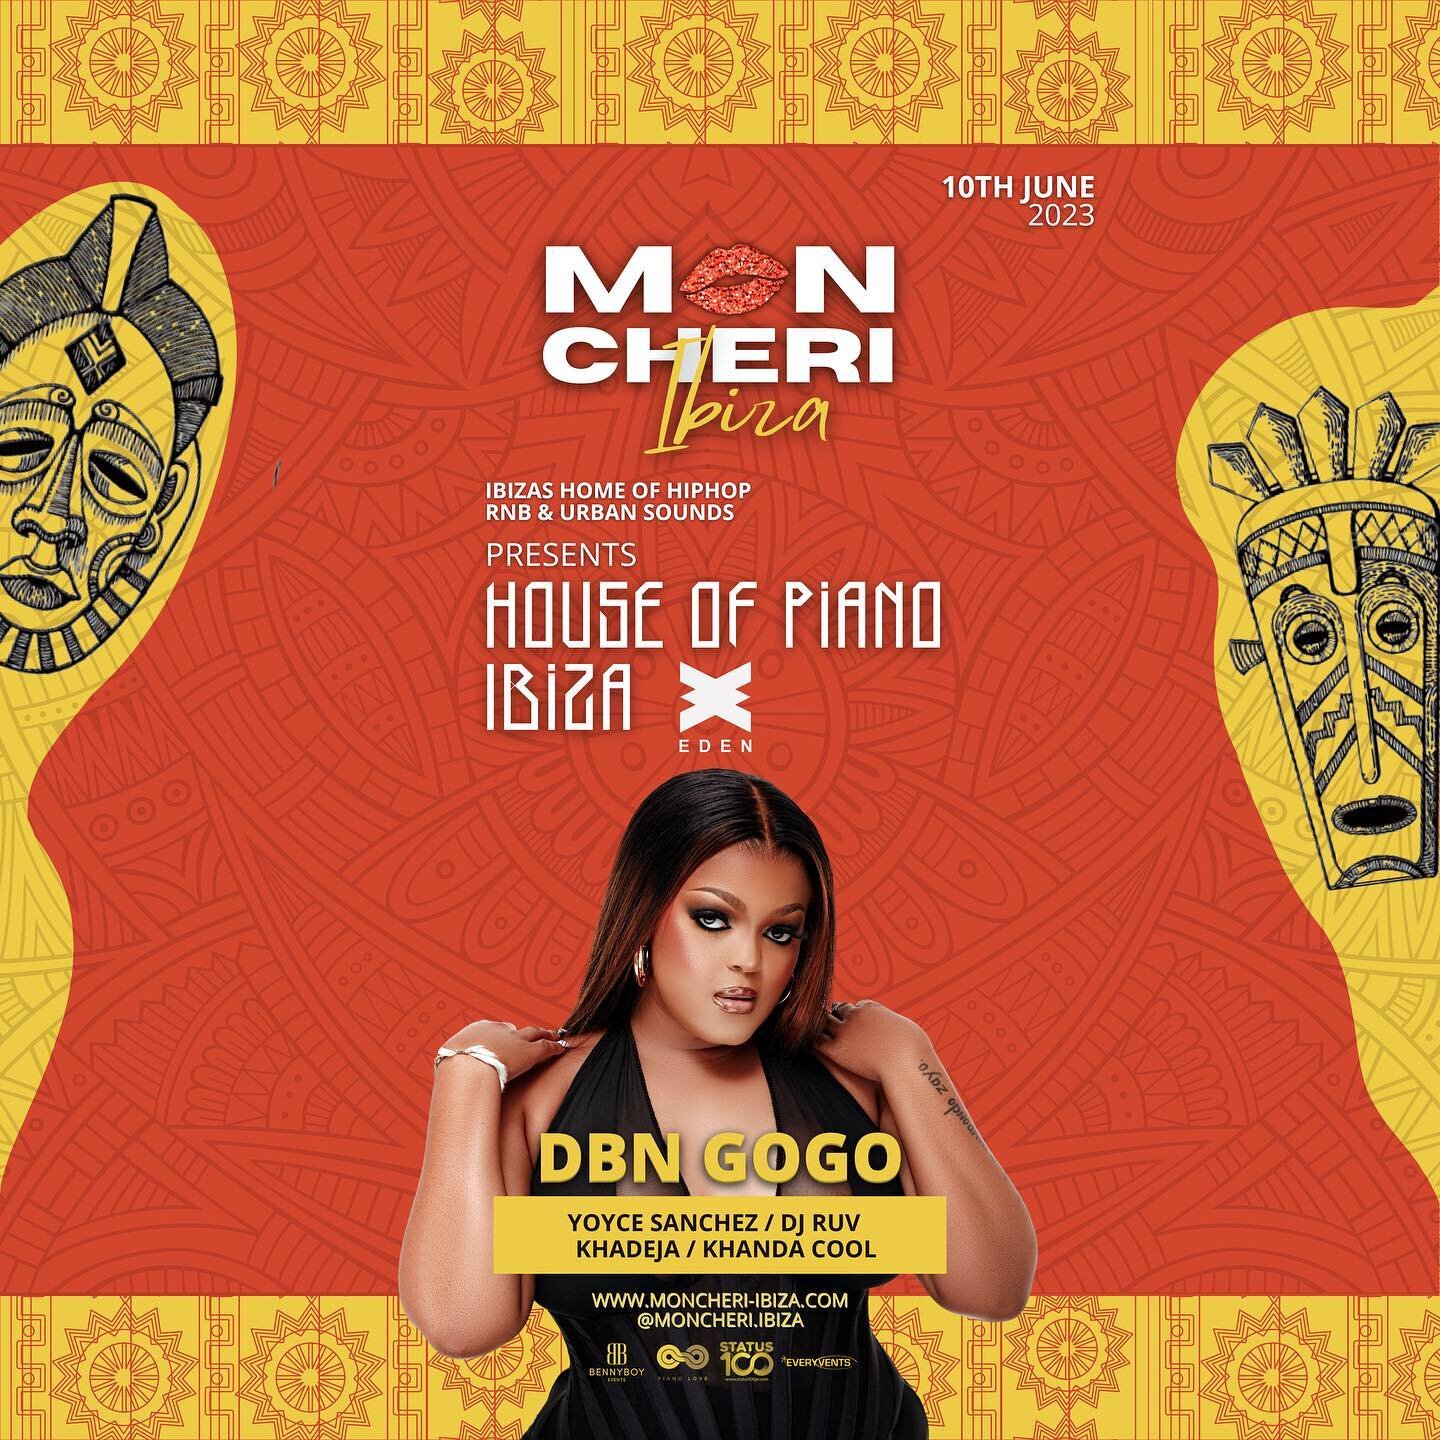 Mon Cheri 👄Ibiza Presents &ldquo;HOUSE OF PIANO &rdquo; 🎹

Special Act @dbngogo ✨🇿🇦📢

Is Coming All The Way To Ibiza 🇪🇸 10TH June 🗓️ To Shut It Down ! 😮&zwj;💨🔥

A Night Full Of Amapiono 🎹 Special Guests &amp; Live Acts ! 💃🏾 

SOUNDS BY 